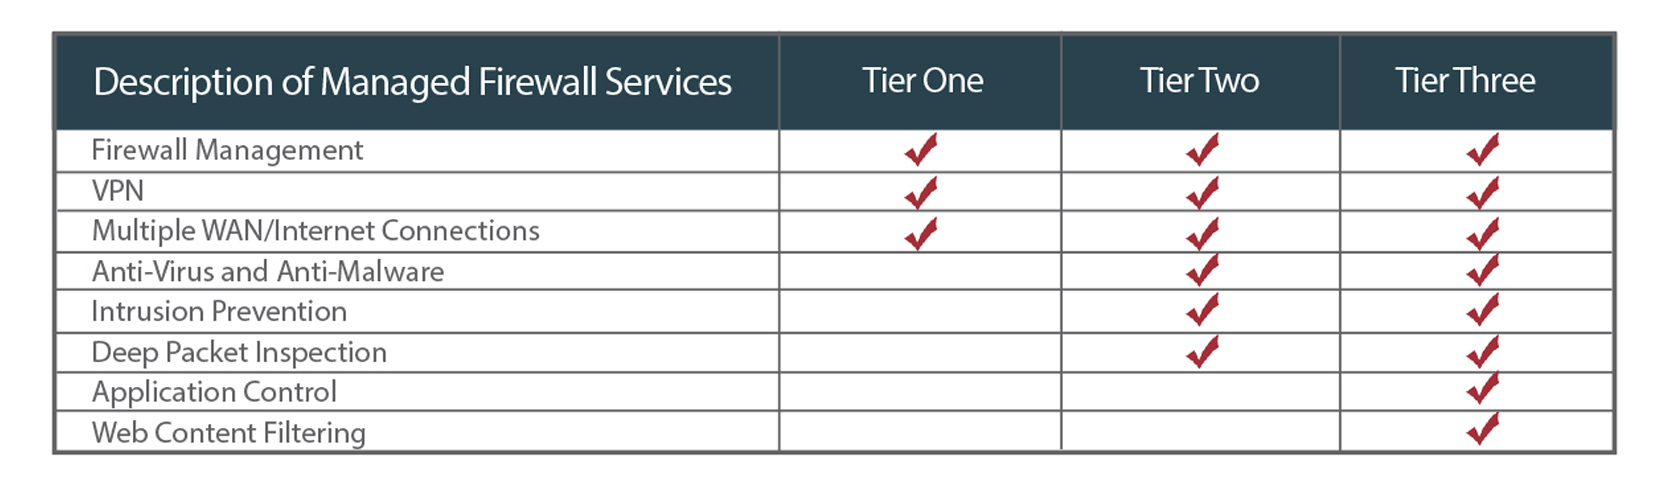 Managed Firewall Tiers in table with services